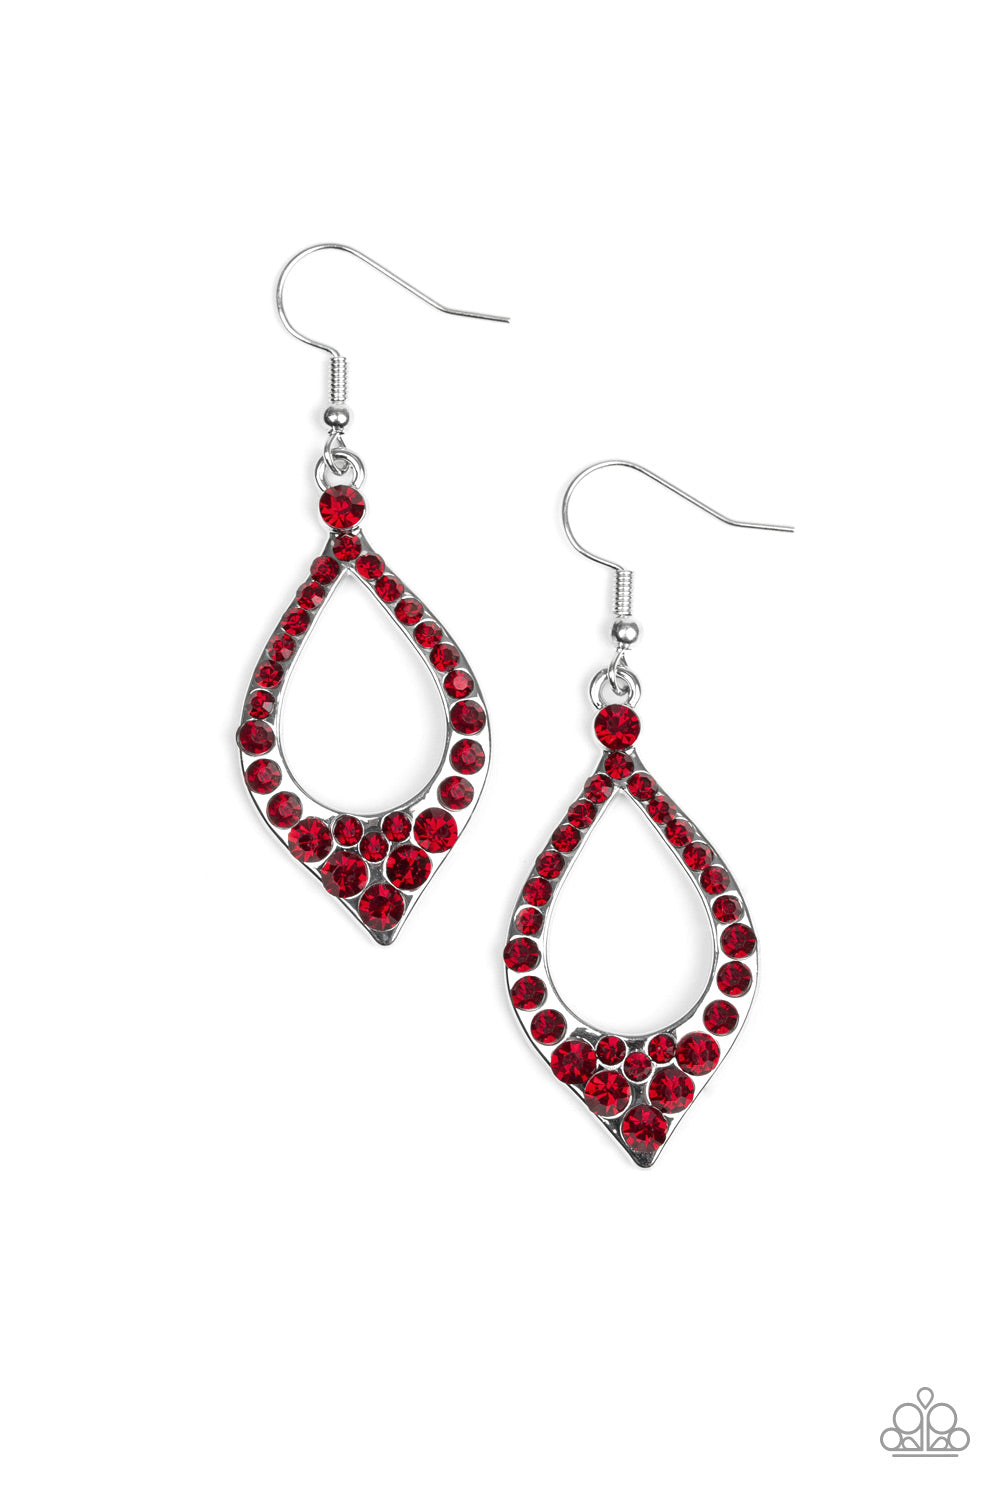 Finest First Lady - Red earrings